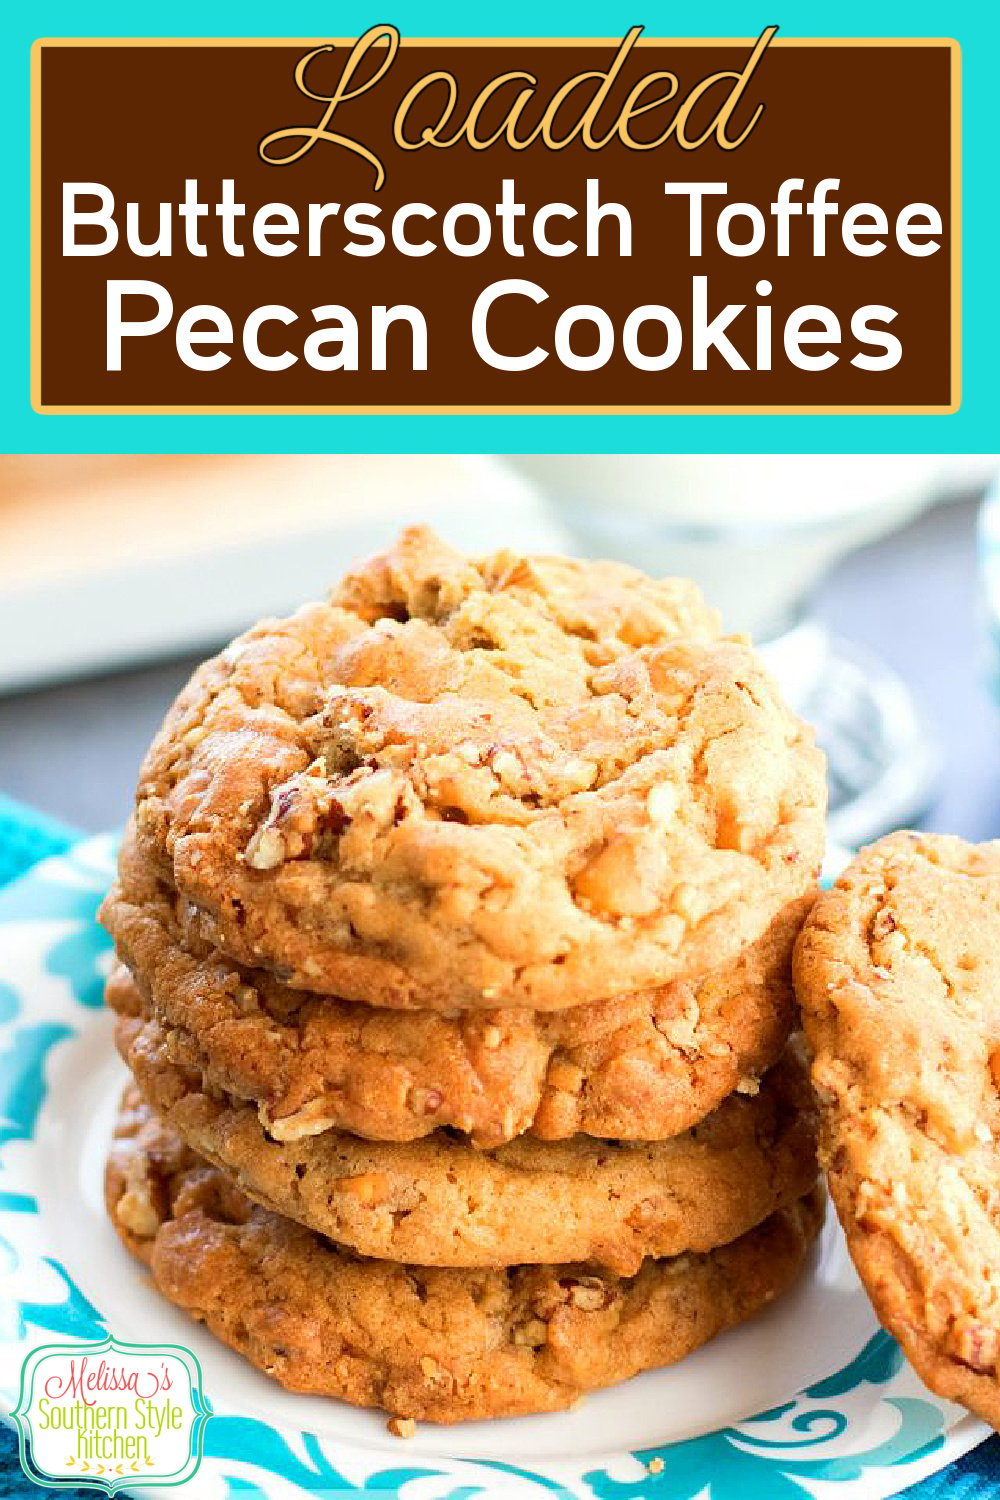 These rich and buttery Loaded Butterscotch Toffee Pecan Cookies are impossible to resist #butterscotchcookies #butterscotch #cookies #cookierecipes #holidaybaking #pecans #toffee #desserts #dessertfoodrecipes #southernfood #southernrecipes via @melissasssk